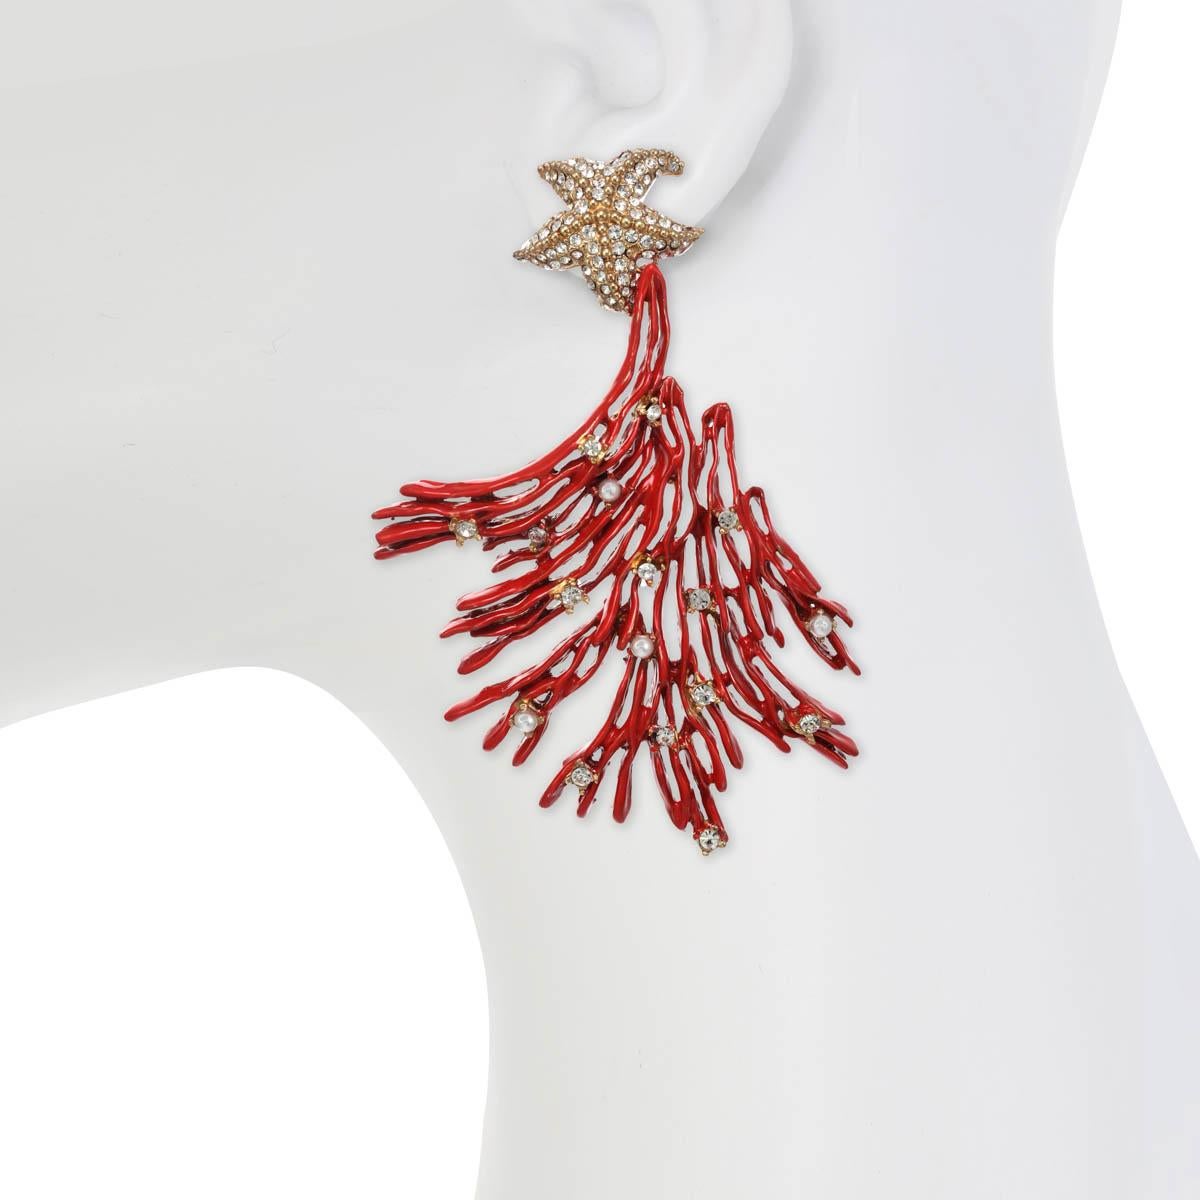 Living in Gold & Red!
  “Laguna” is an Italian name meaning “A body of water cut off from a larger body by a reef of sand or coral”, perfectly suits  this gorgeous pair of statement earrings. Wear your hair up in an elegant style and make a